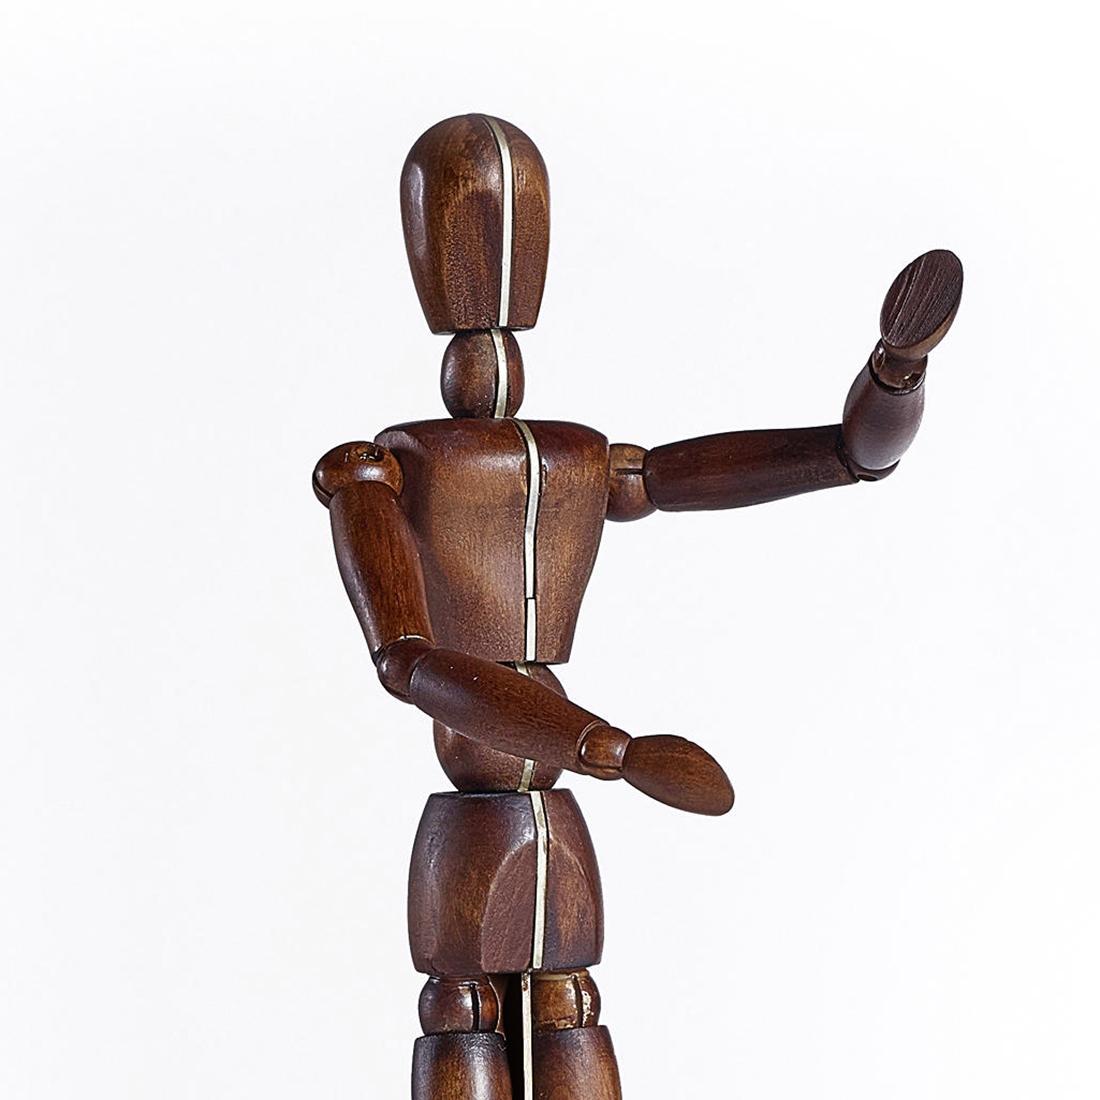 Hand-Crafted Wooden Man Sculpture For Sale